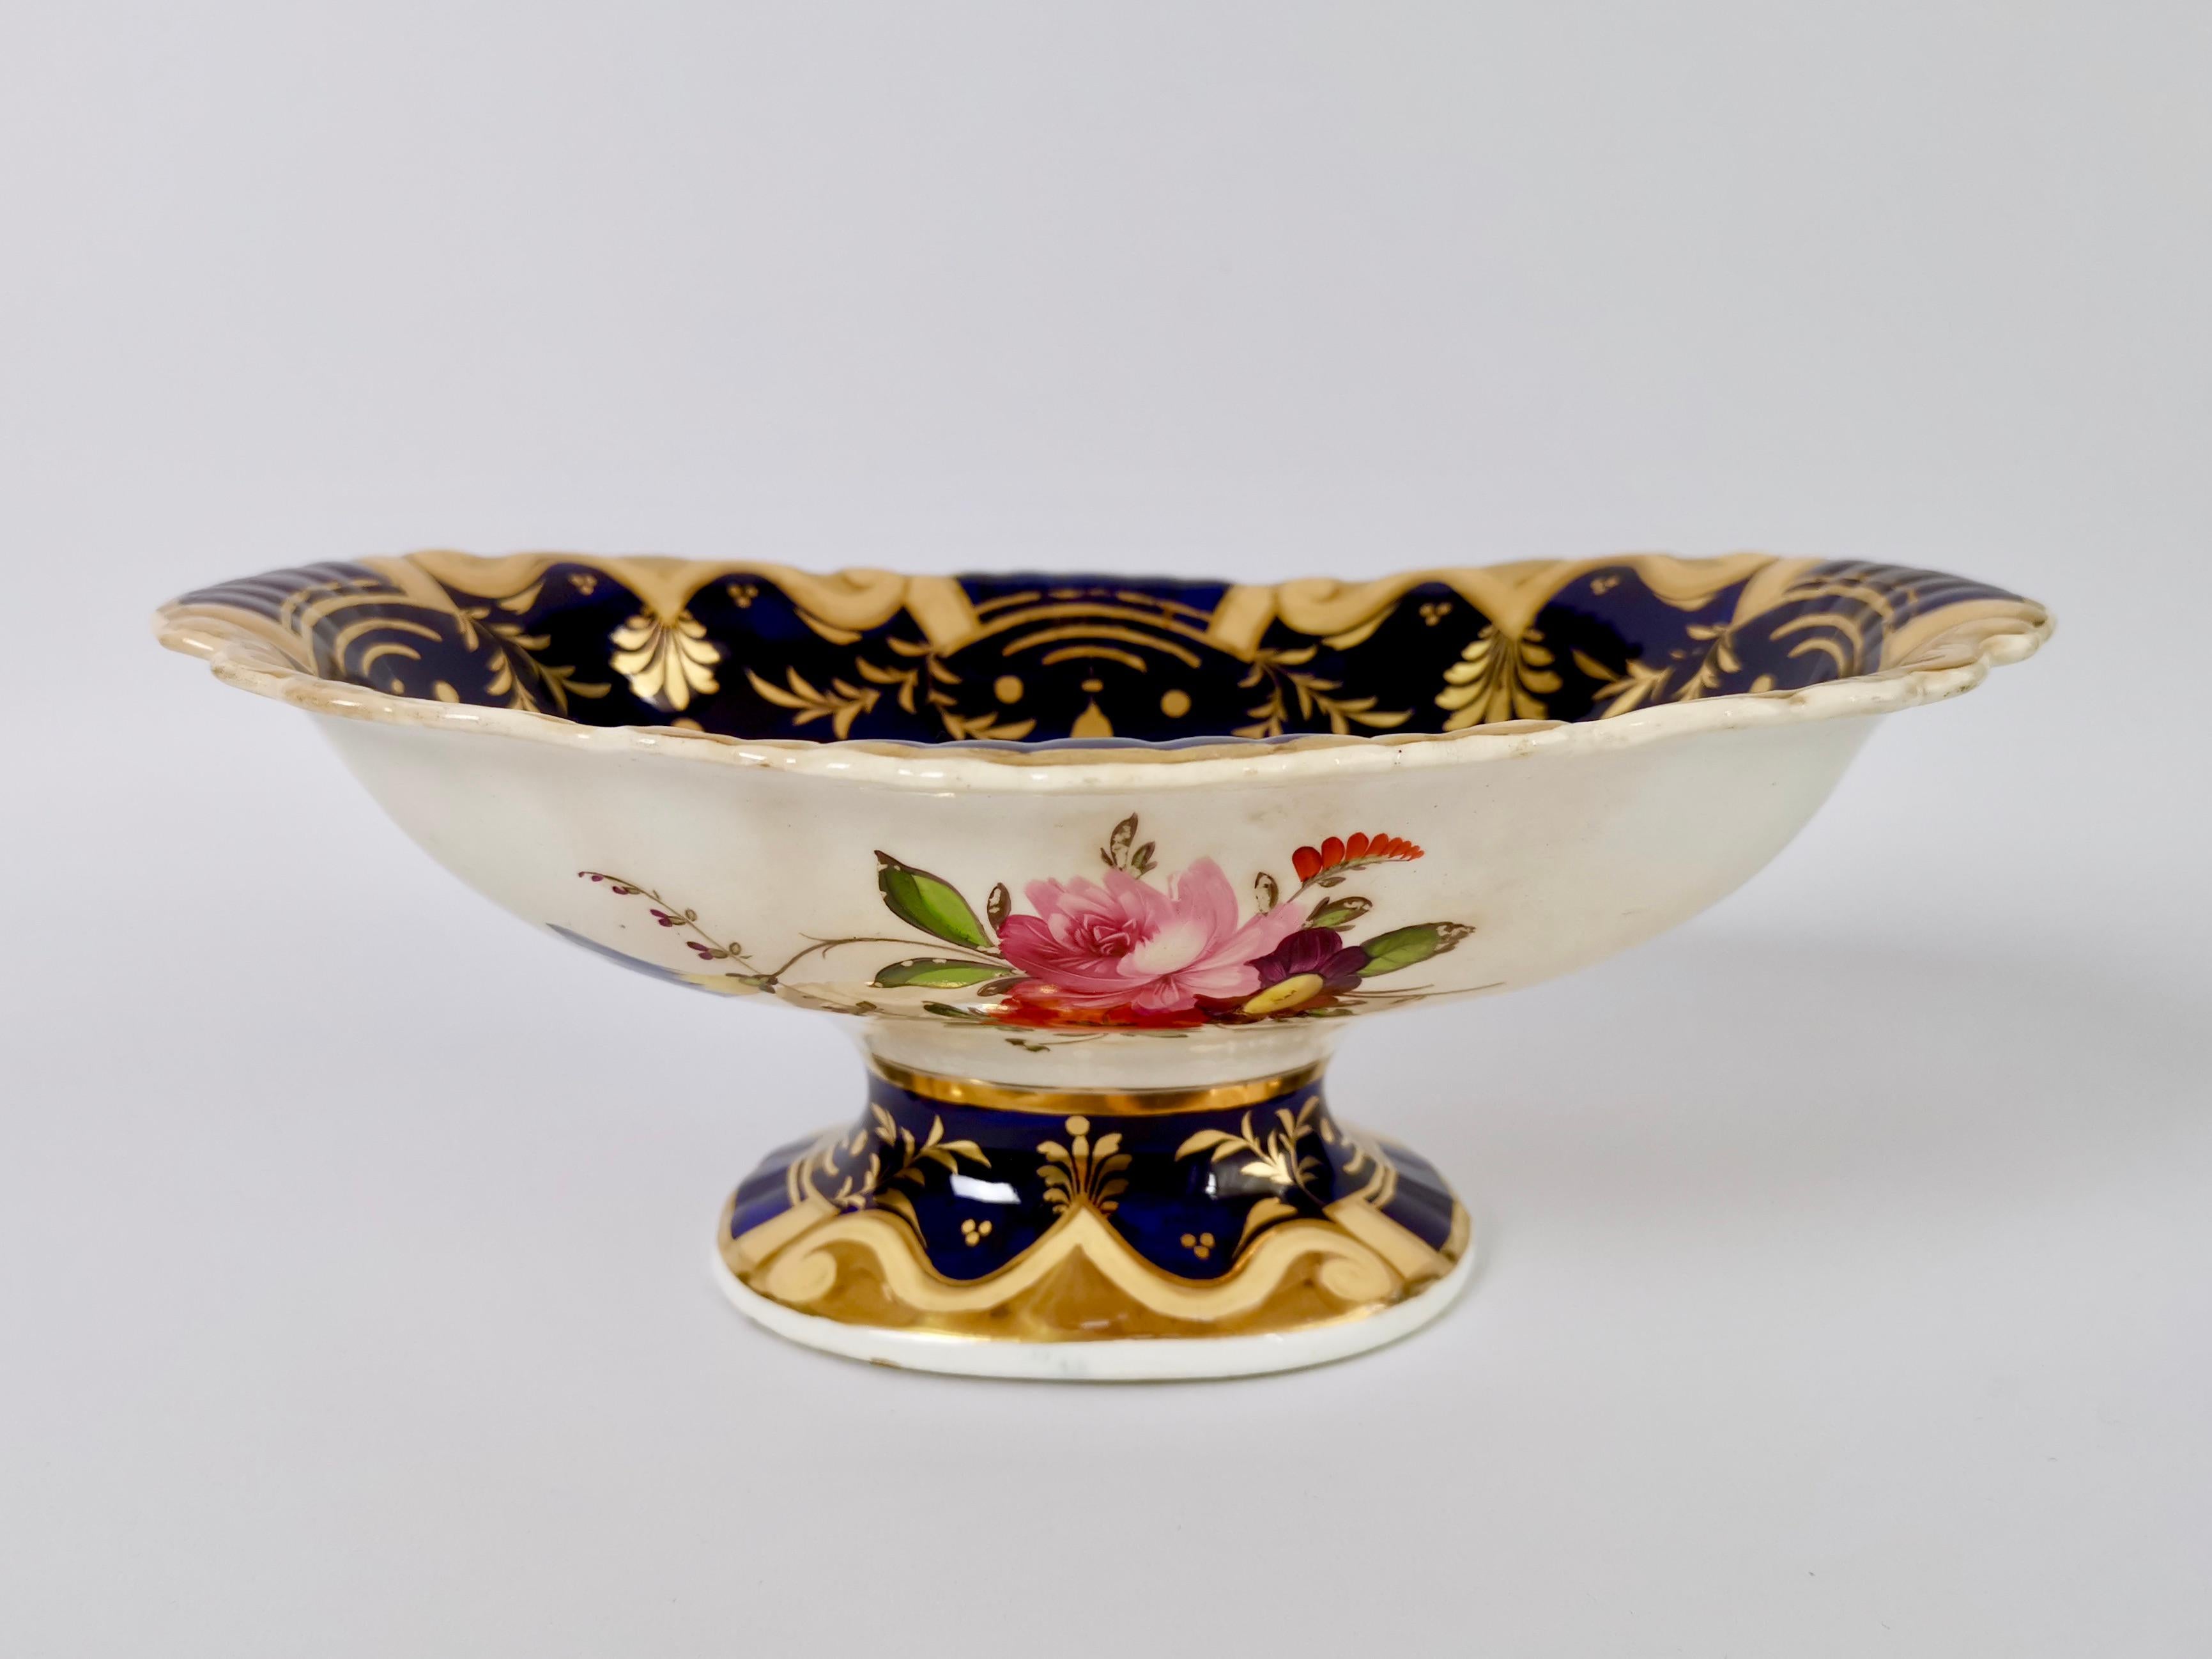 Early 19th Century Ridgway Dessert Service, Moustache Shape with Sublime Flowers, circa 1825